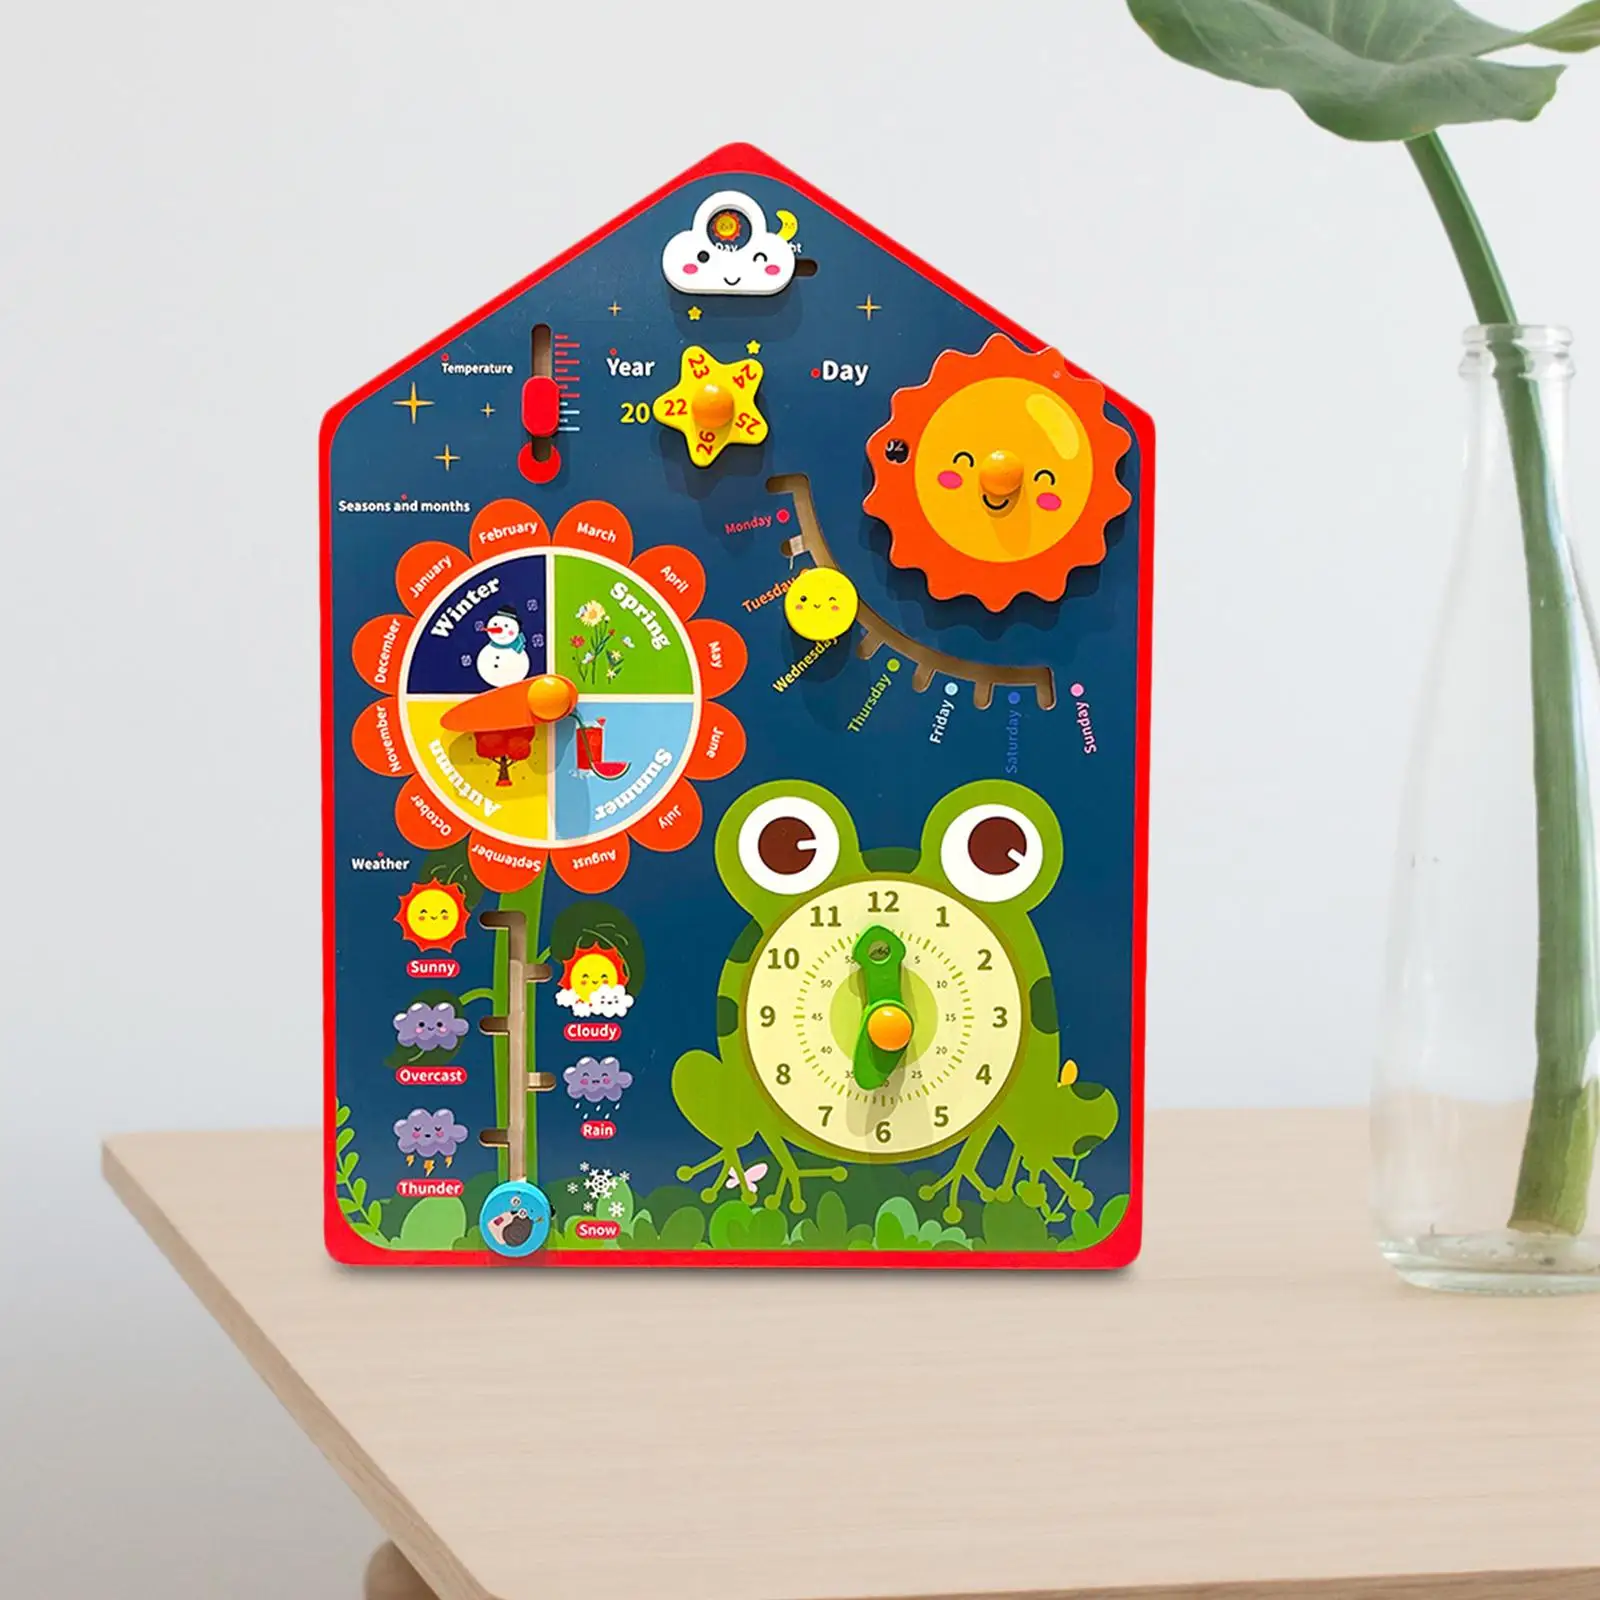 Montessori Wooden Calendar Clock Activities Calendar Early Learning Educational Toy for Toddlers Kids Girls